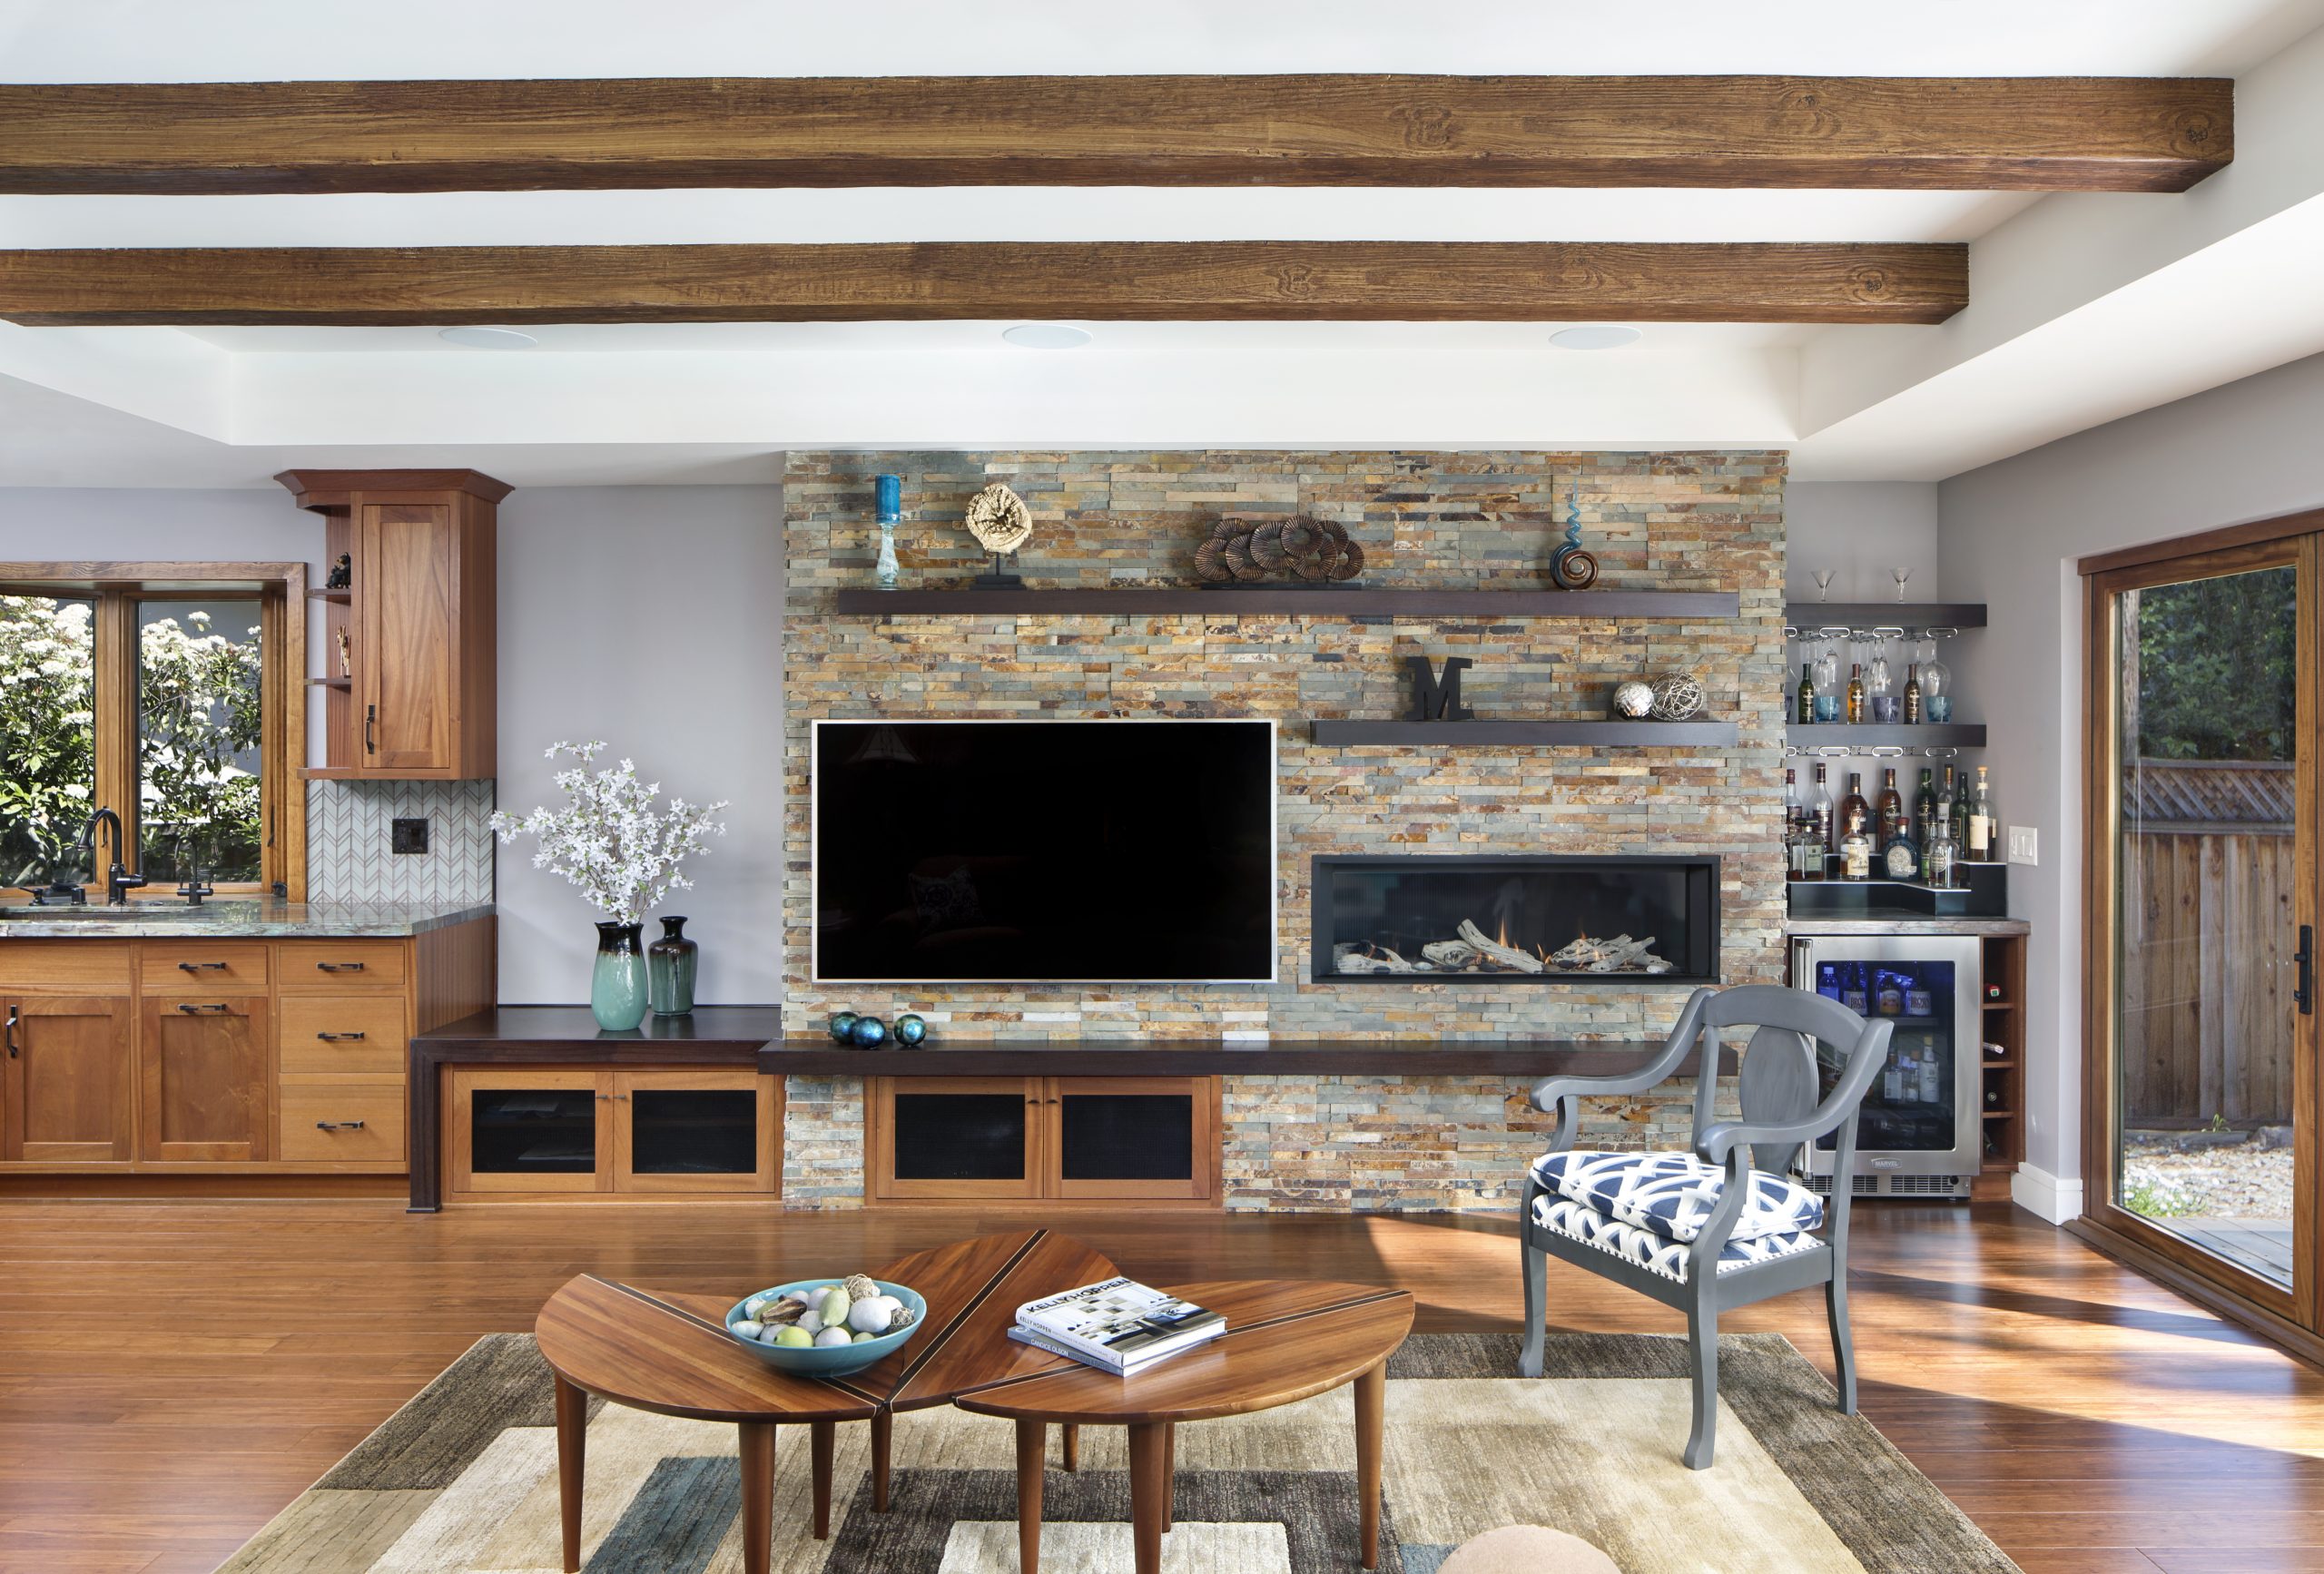 A modern living room with a built in wine refrigerator.